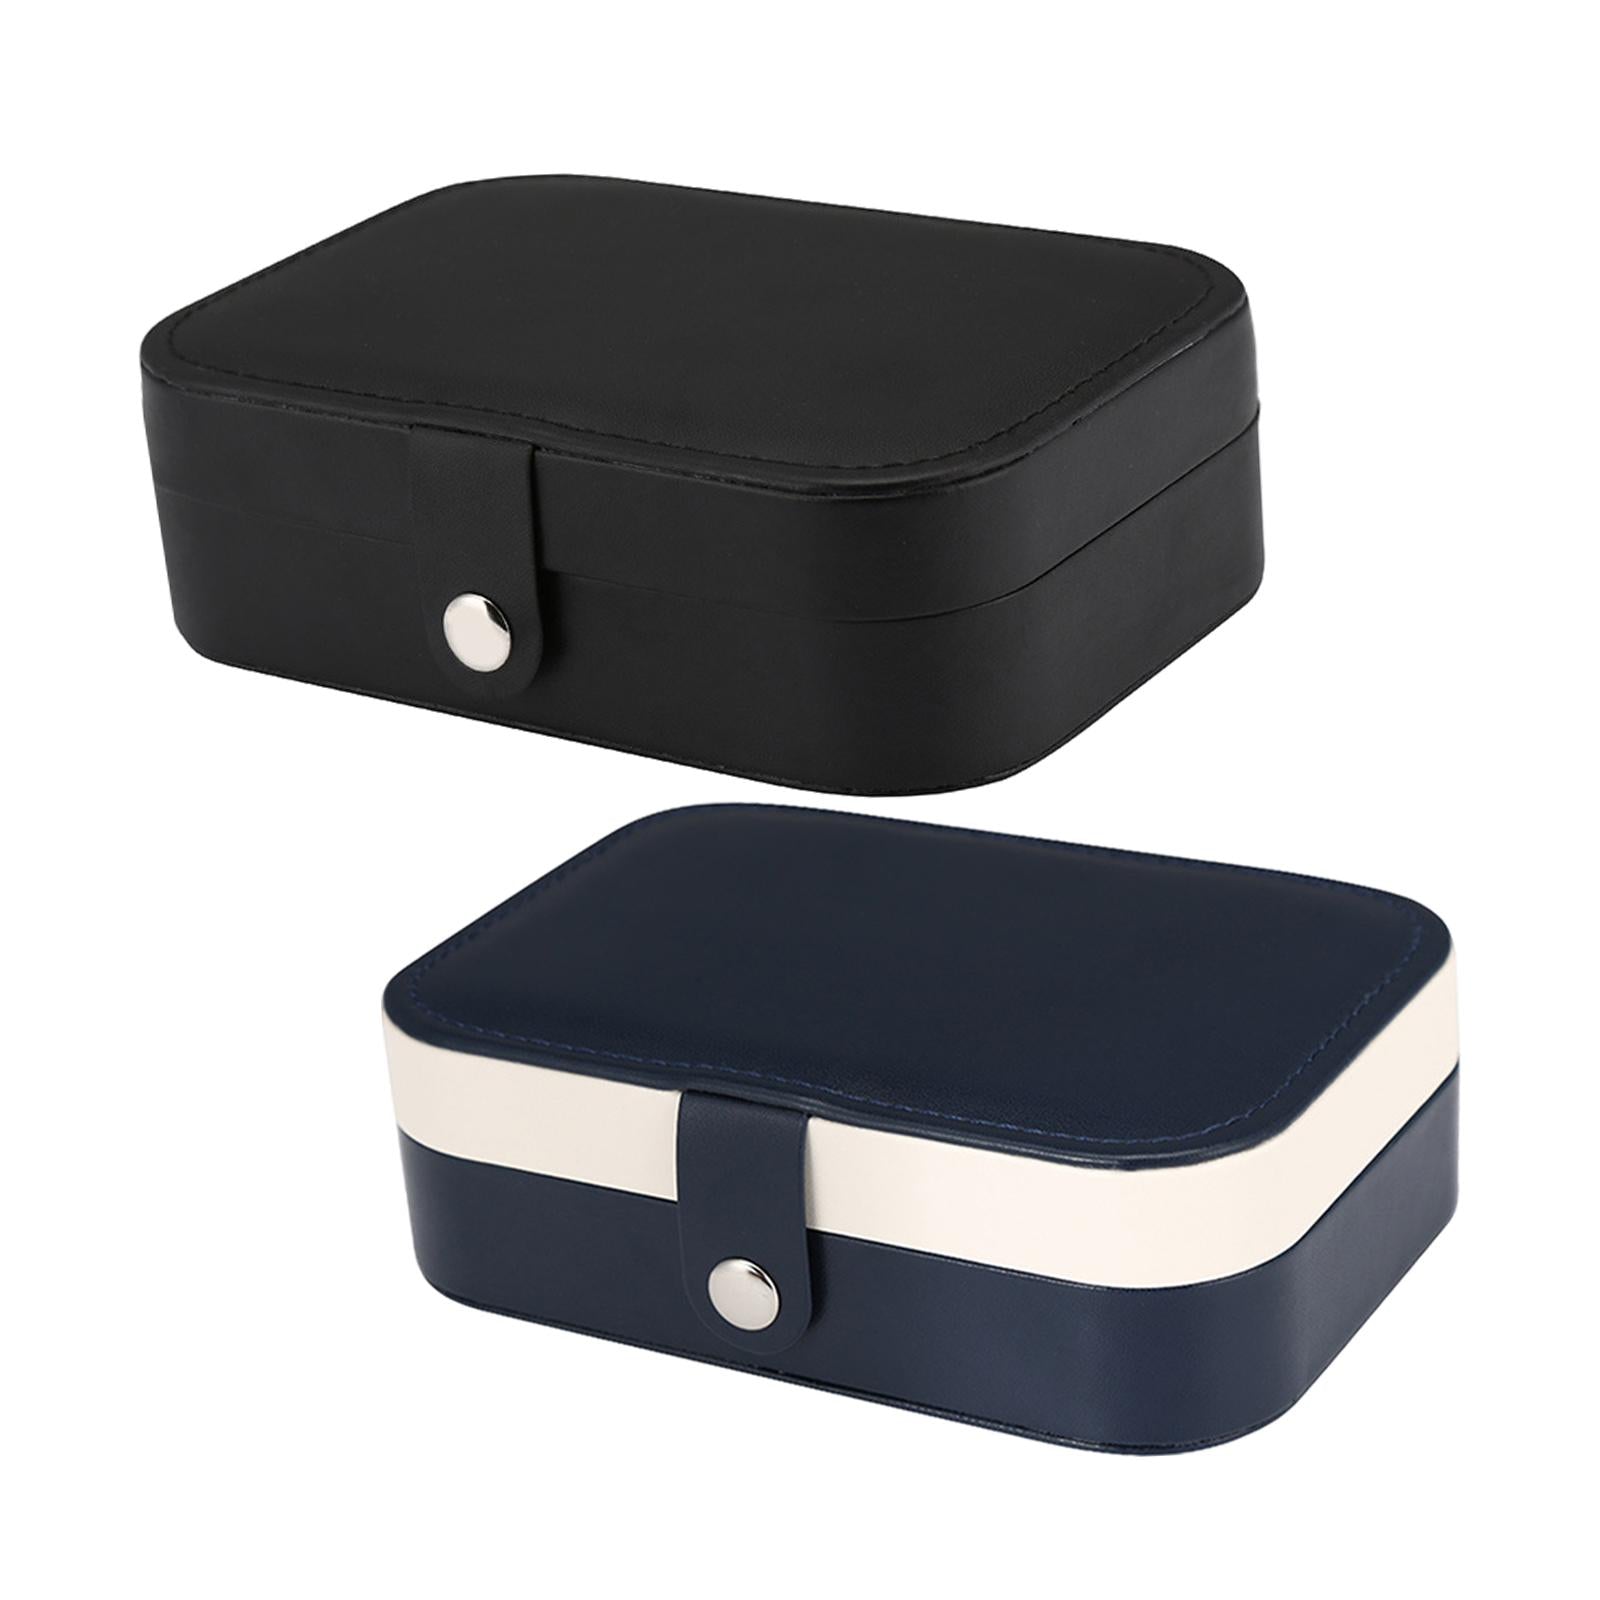 Jewelry Box Waterproof with Lock Portable Large Organiser Holder Showcase for Rings Watches Bracelets Travel Accessories Gift